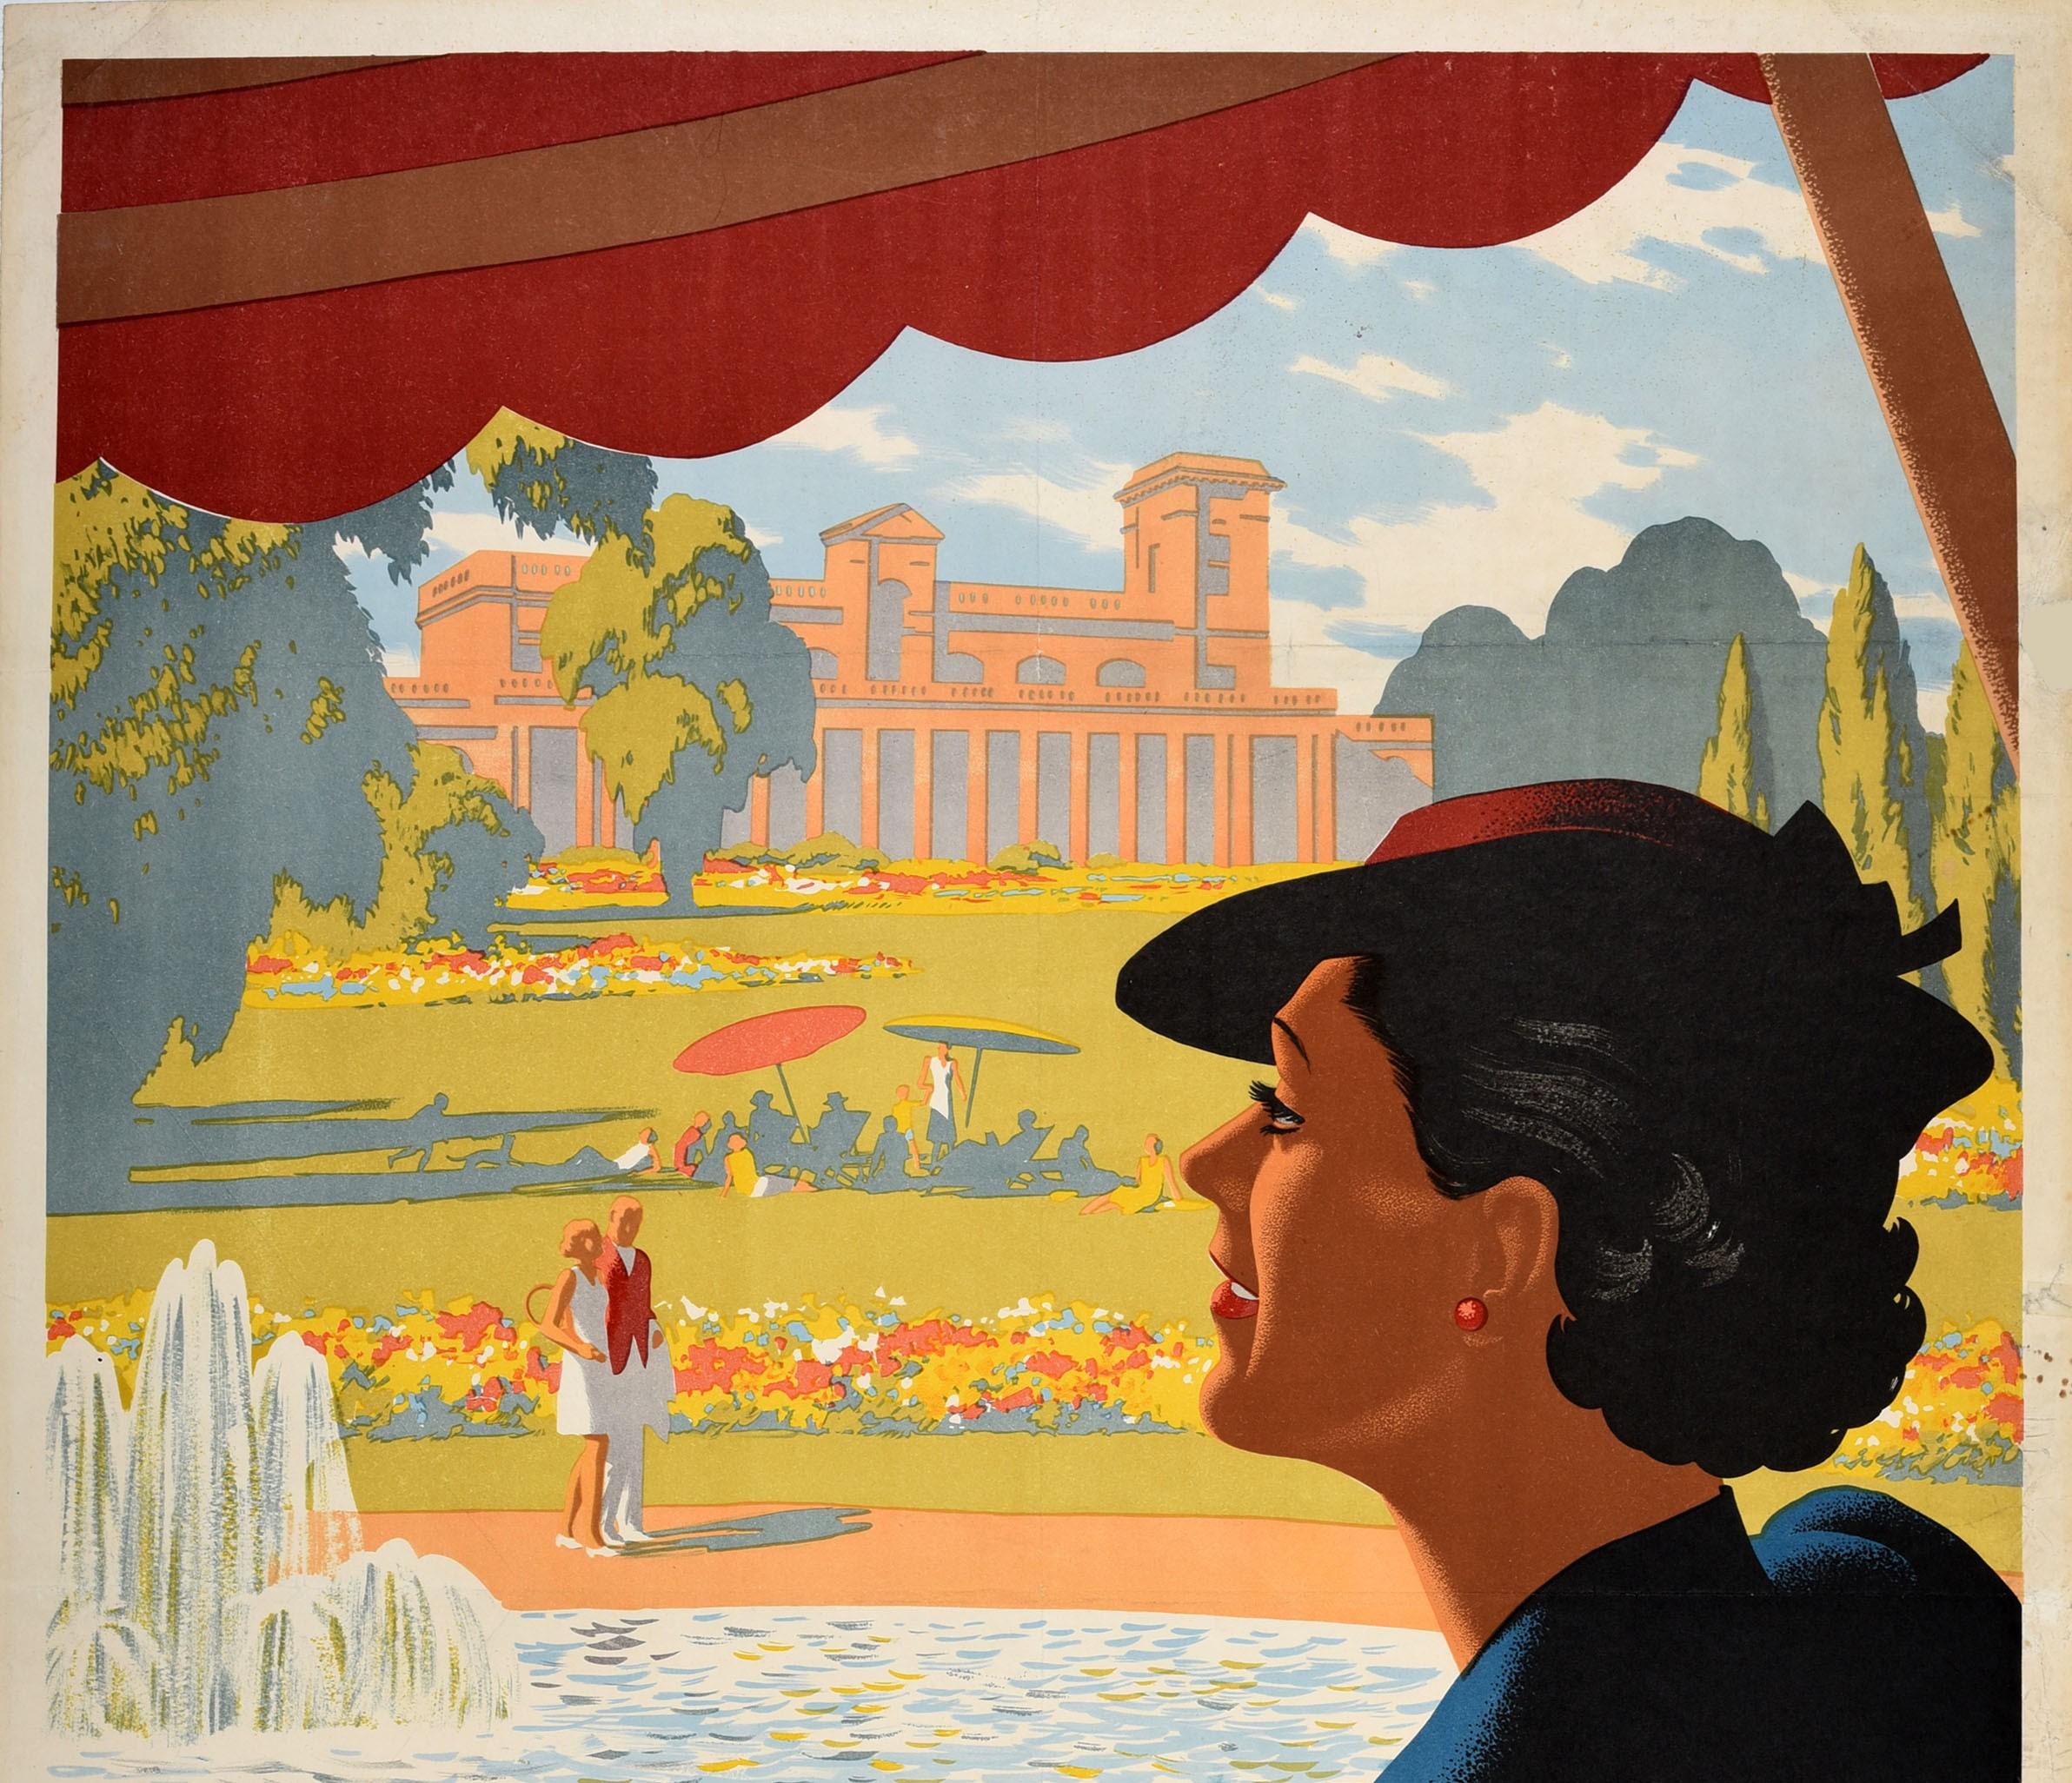 Original vintage GWR travel poster for Royal Leamington Spa issued by Great Western Railway featuring a stunning Art Deco design by Ronald George Lampitt (1906-1988) depicting a smartly dressed lady drinking a glass of water under the shade of a